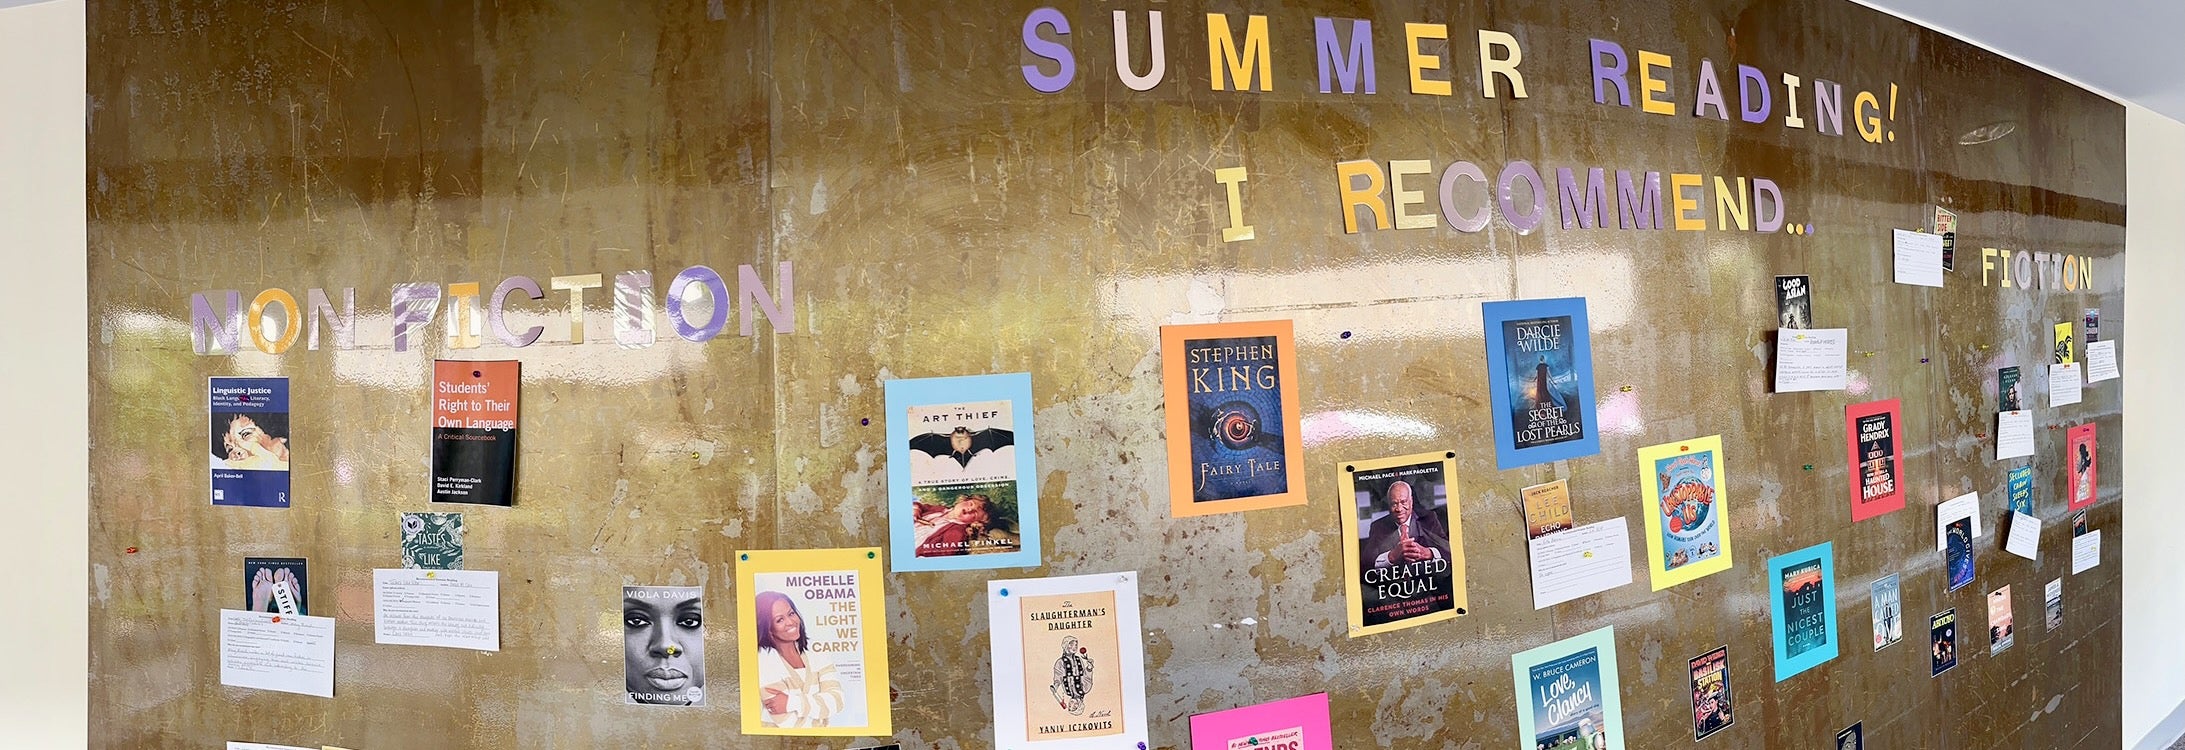 Summer Reading Recommendations magnet wall on the first floor of the library. (Photos by Ronnie Woodward) 